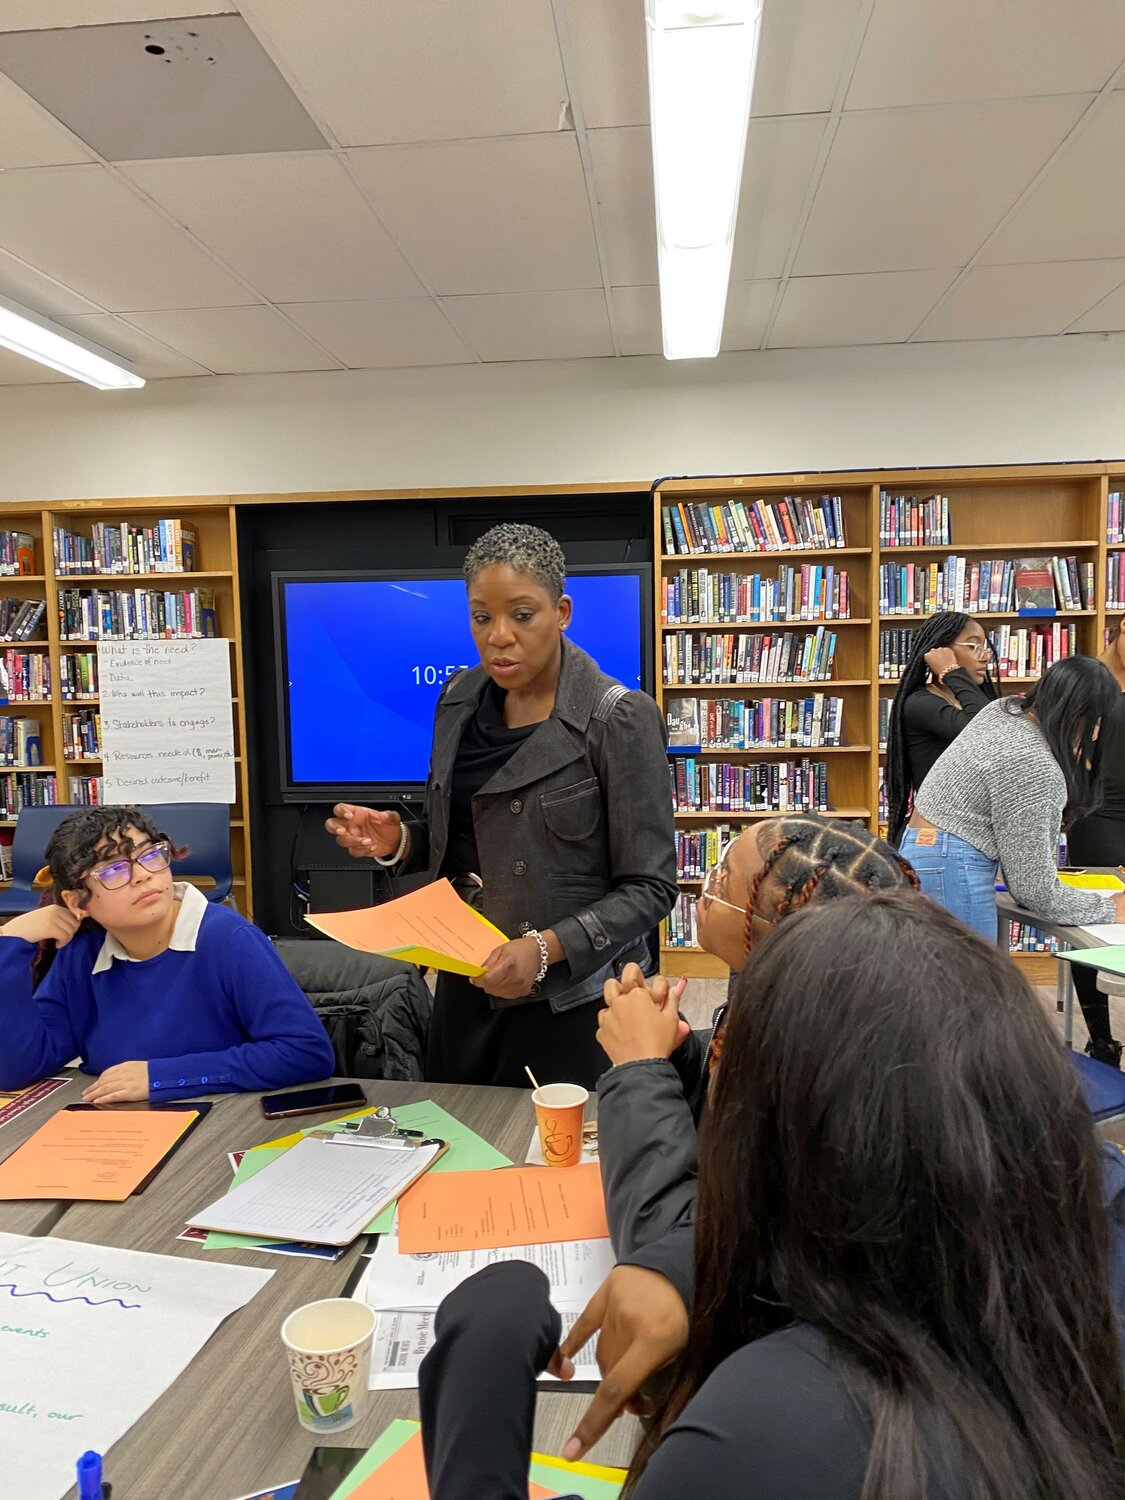 Nassau County Legislator, Siela Bynoe, sharing her wisdom and helping teach students from Malverne and Uniondale about policy making and the legislative process.